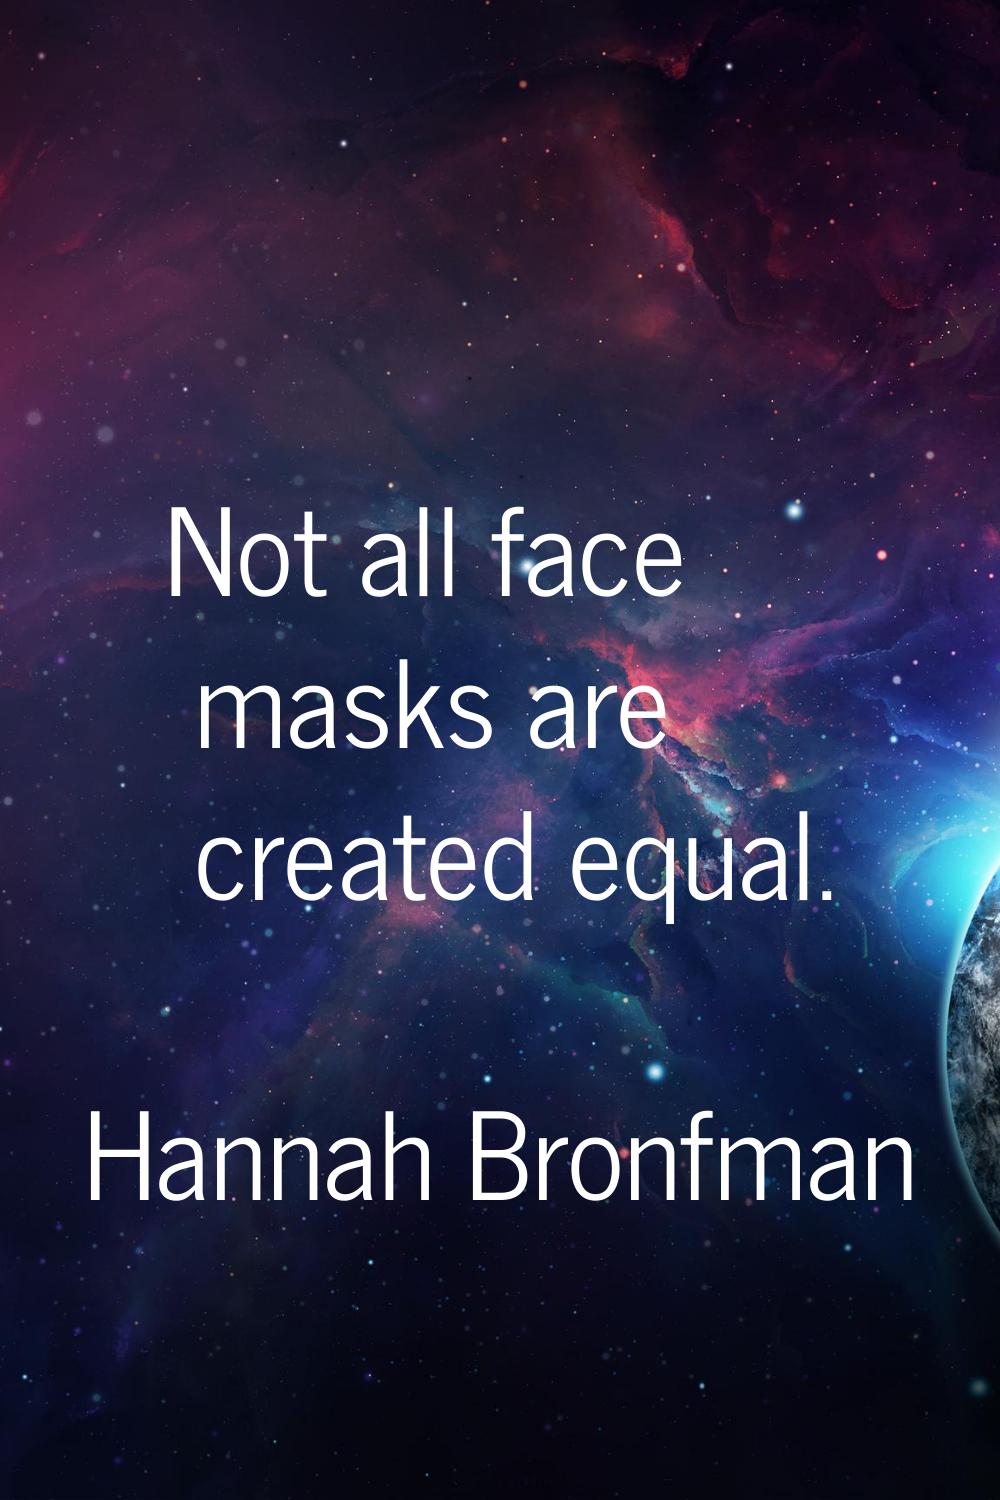 Not all face masks are created equal.